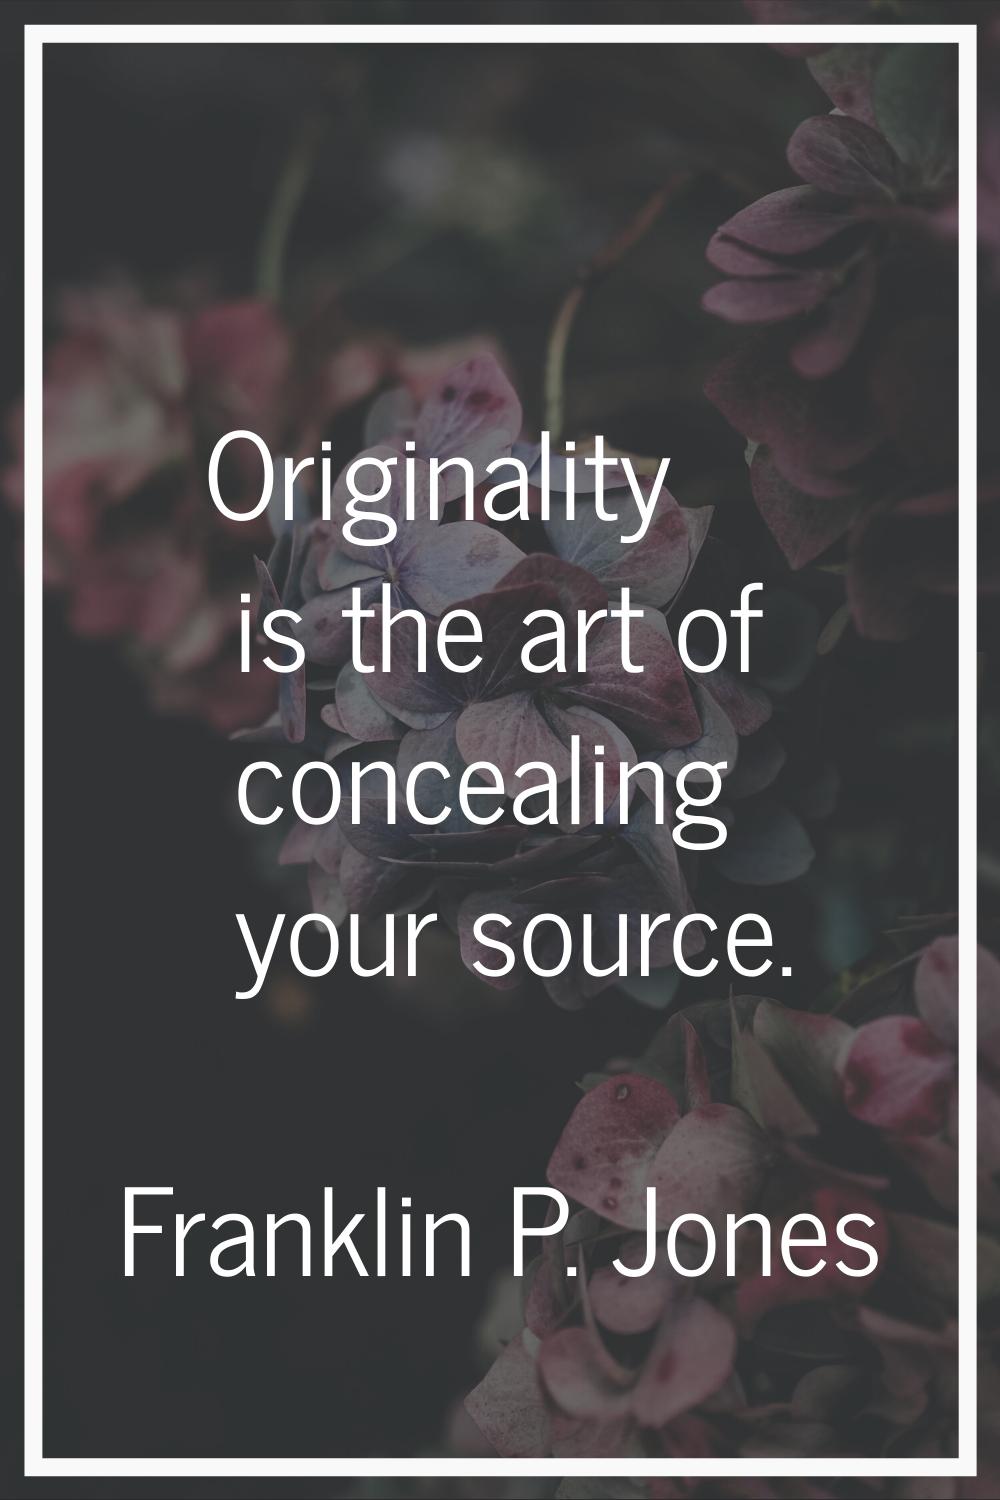 Originality is the art of concealing your source.